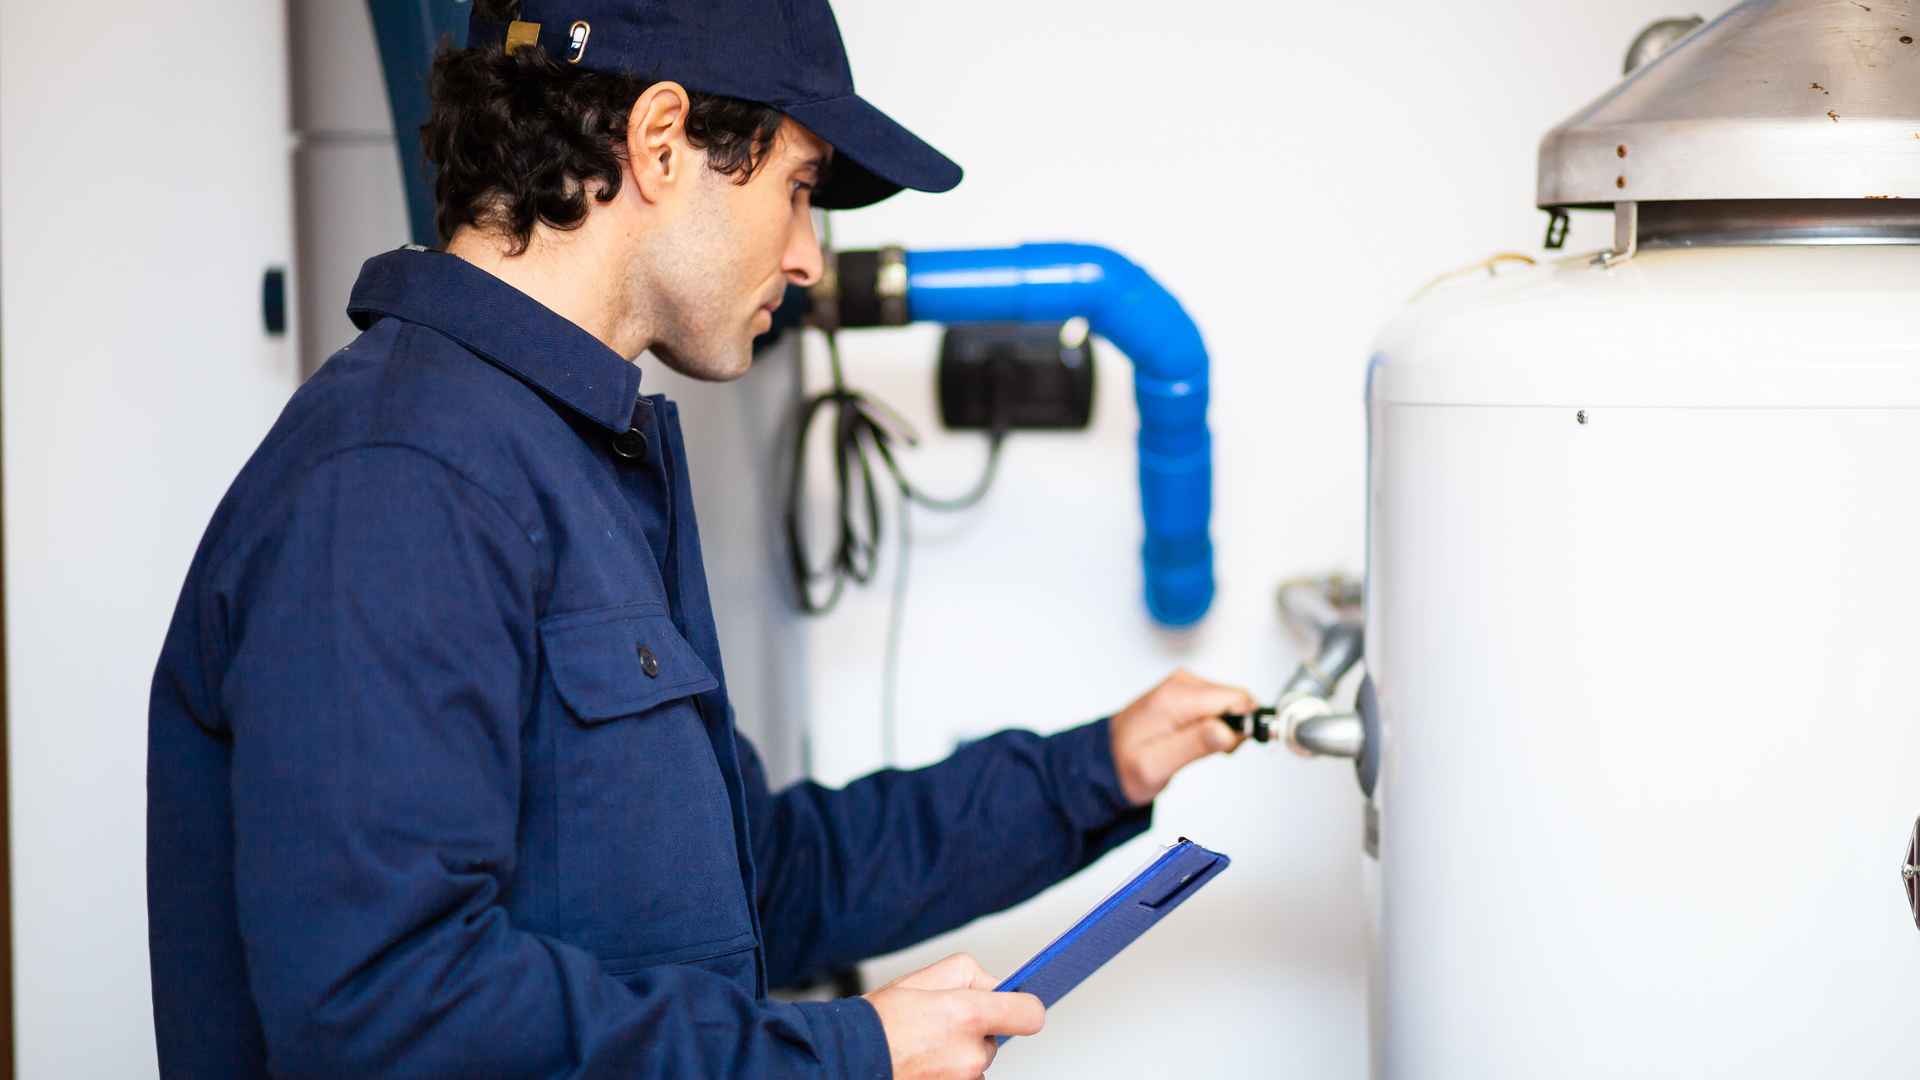 A technician in a navy blue uniform inspecting a large water heater replacement with a clipboard in hand.